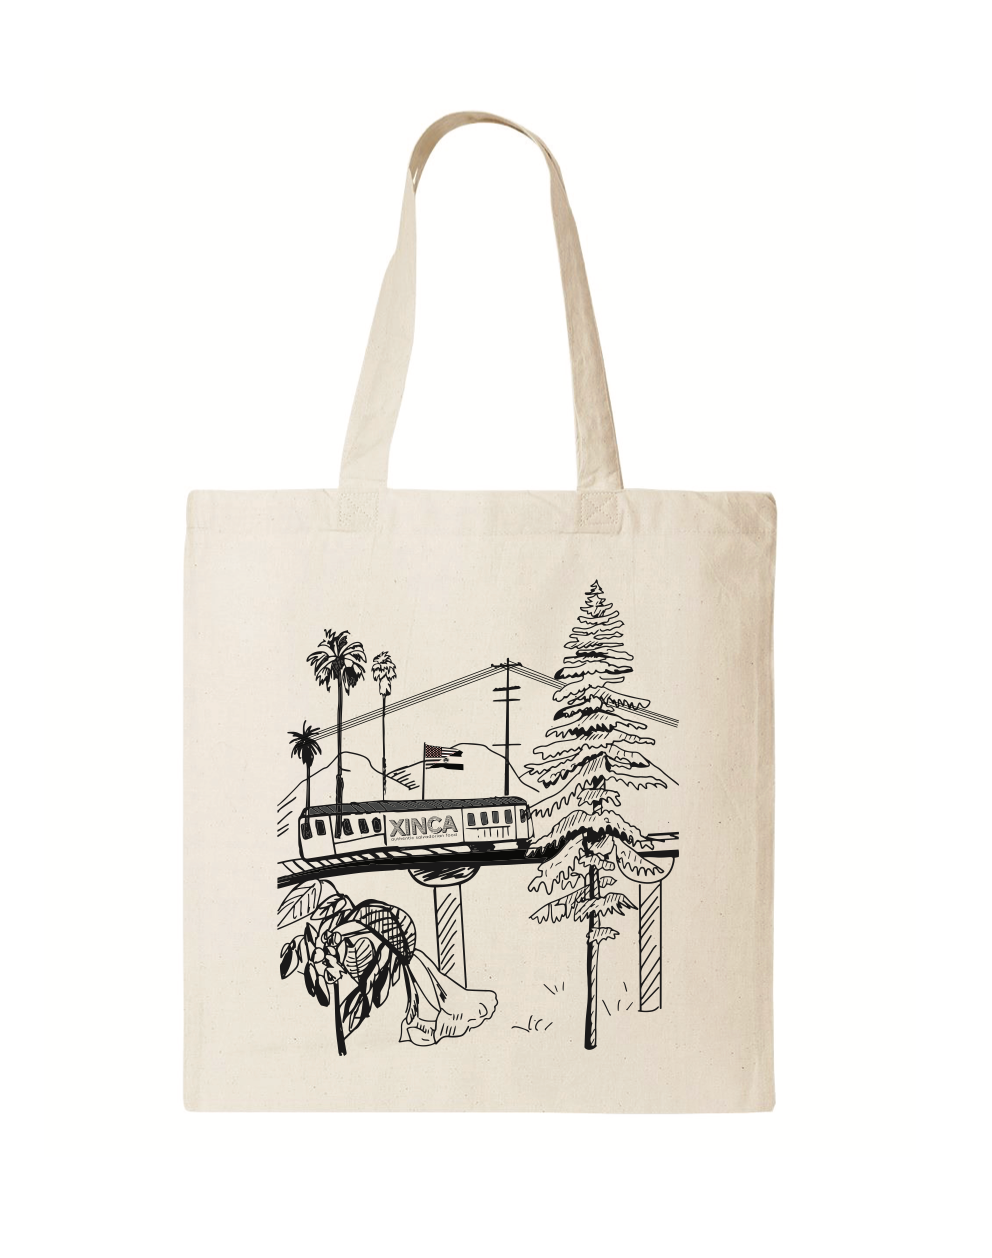 Beige Canvas tote bag with image of trees, Loroco flower with a train containing the Xinca Logo 